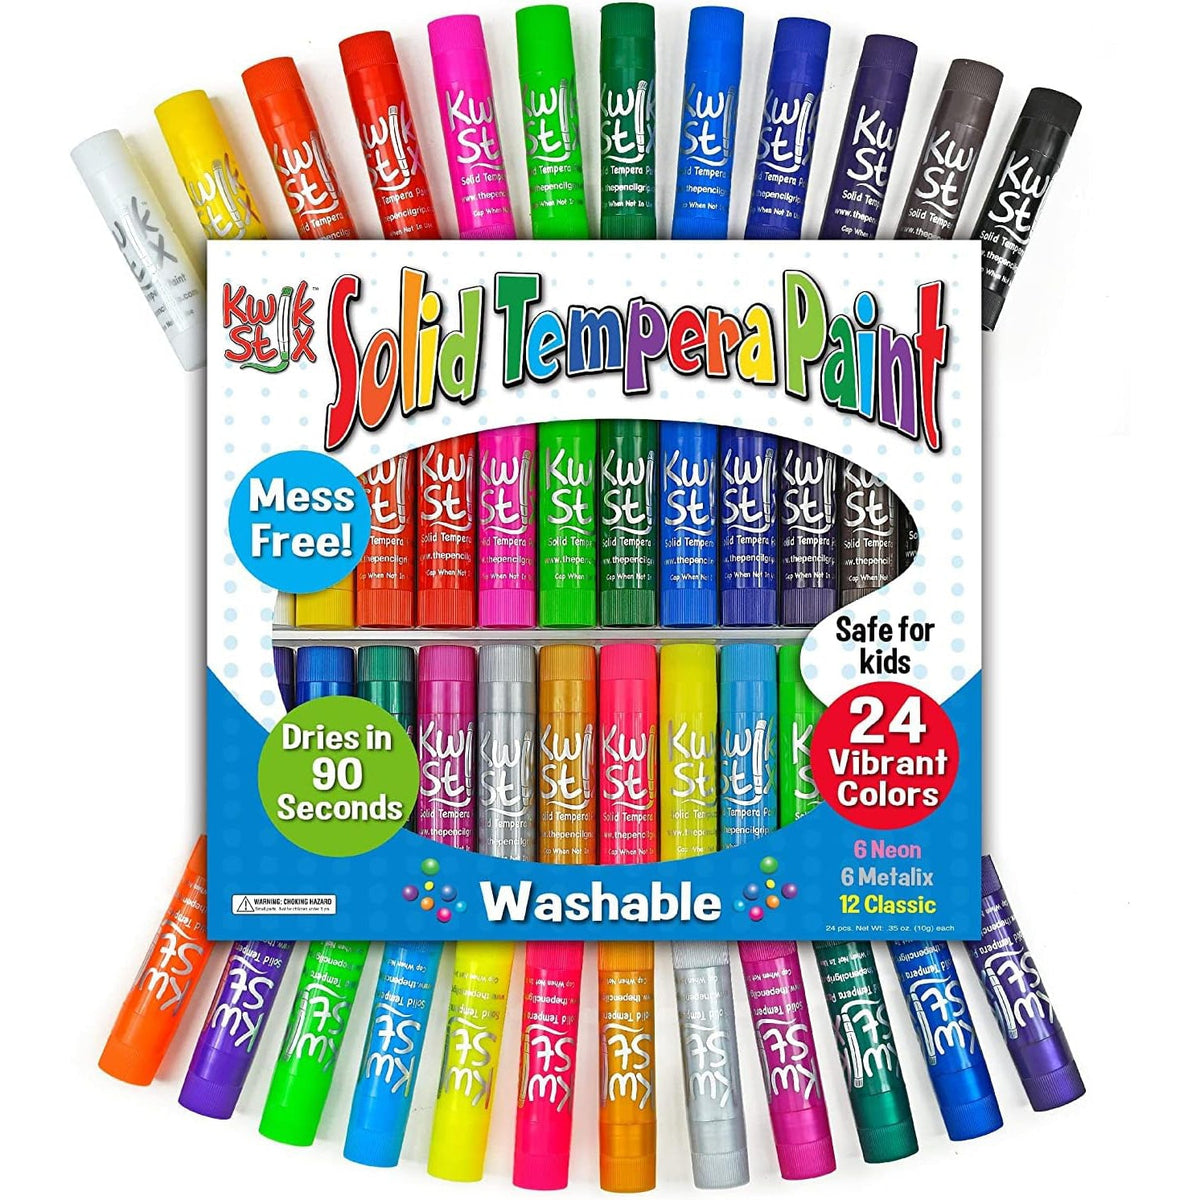 Solid Tempera Paint Sticks, 30 Pack, Fast Drying, No Brush or Water Needed, Washable, 30 Assorted Colors, 12 Classic/12 Metallic/6 Neon, by Better